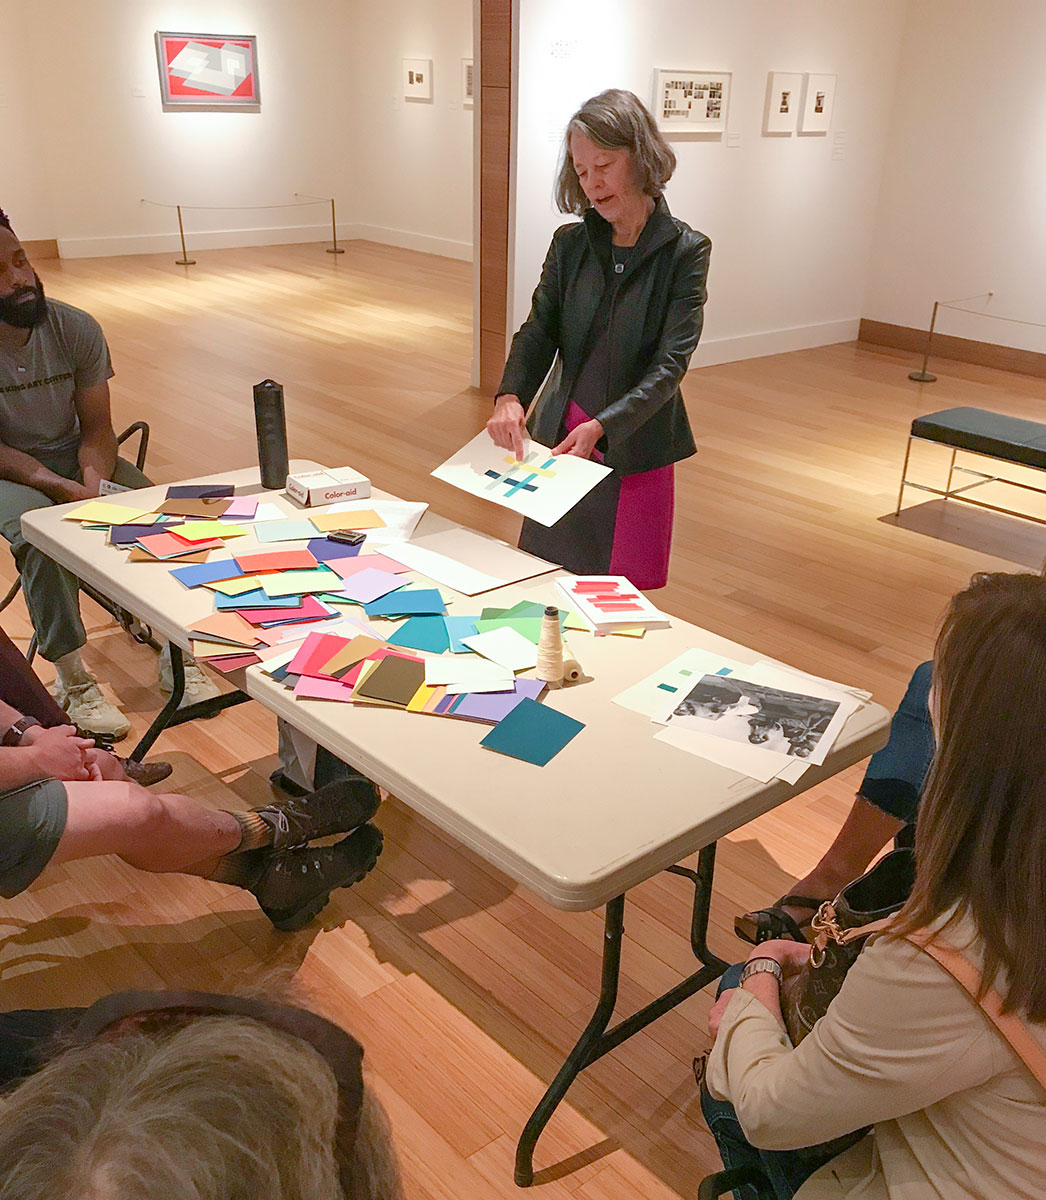 Claire Campbell Park on Josef Albers at the Heard Museum for Modern Phoenix Week 2019